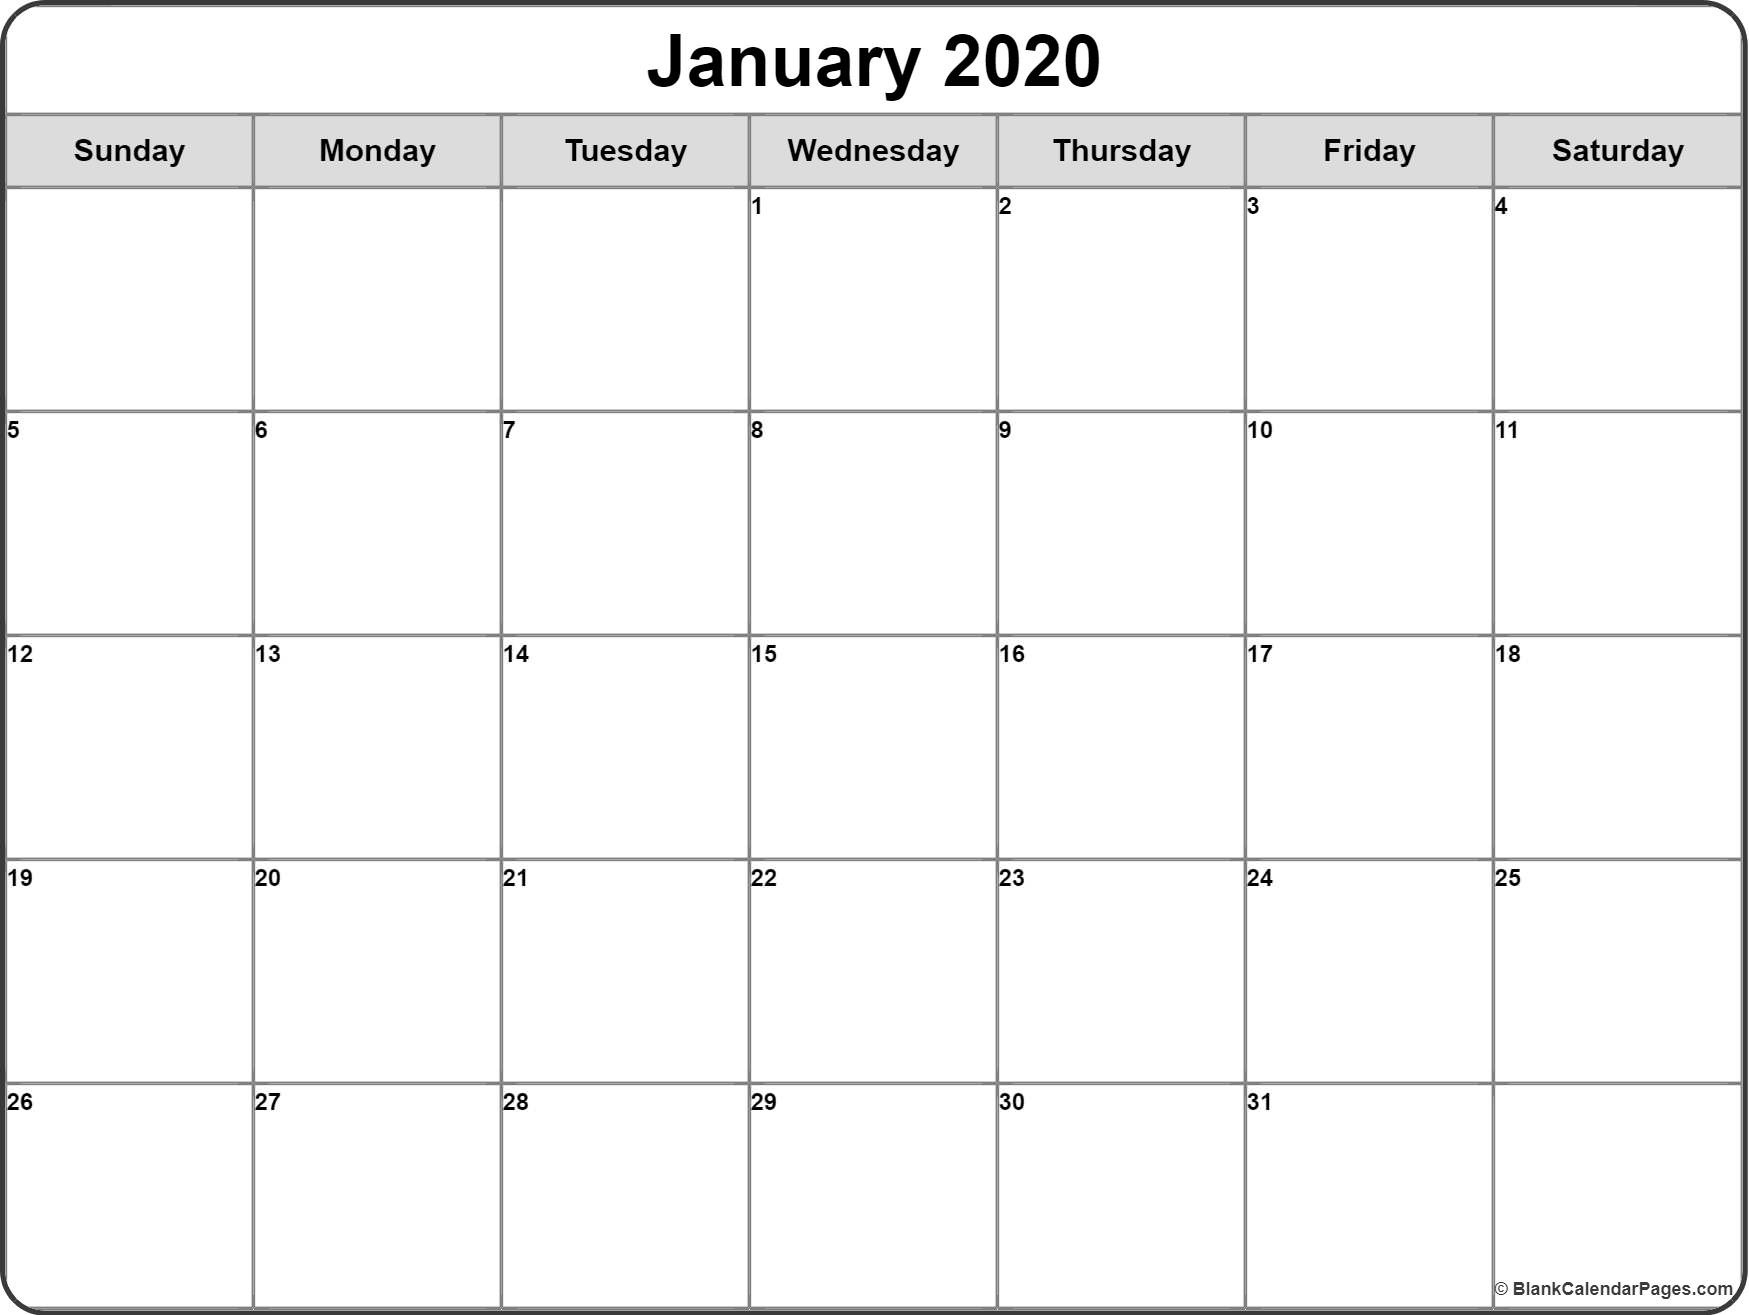 January 2020 Calendar | Free Printable Monthly Calendars-2020 Month At A Glance Calendar Template